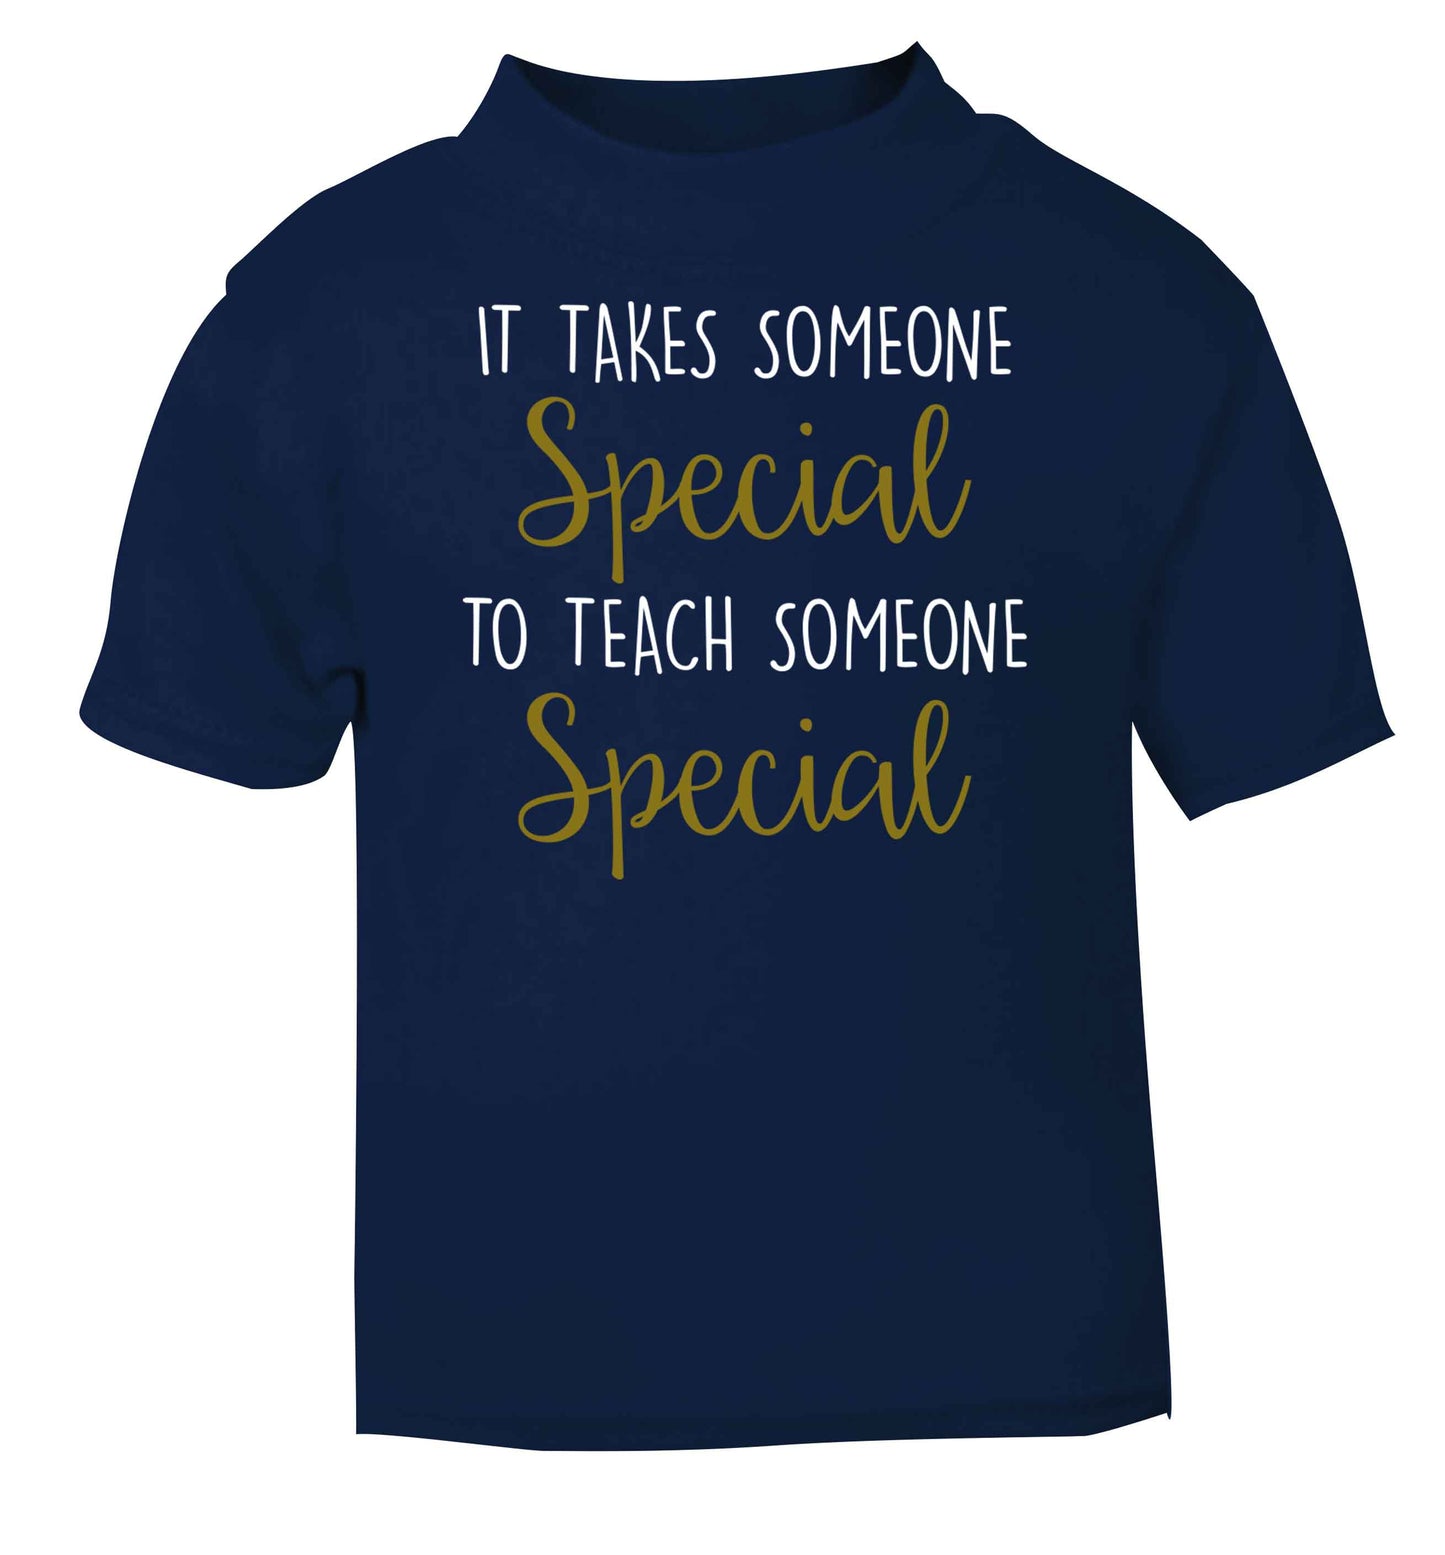 It takes someone special to teach someone special navy baby toddler Tshirt 2 Years